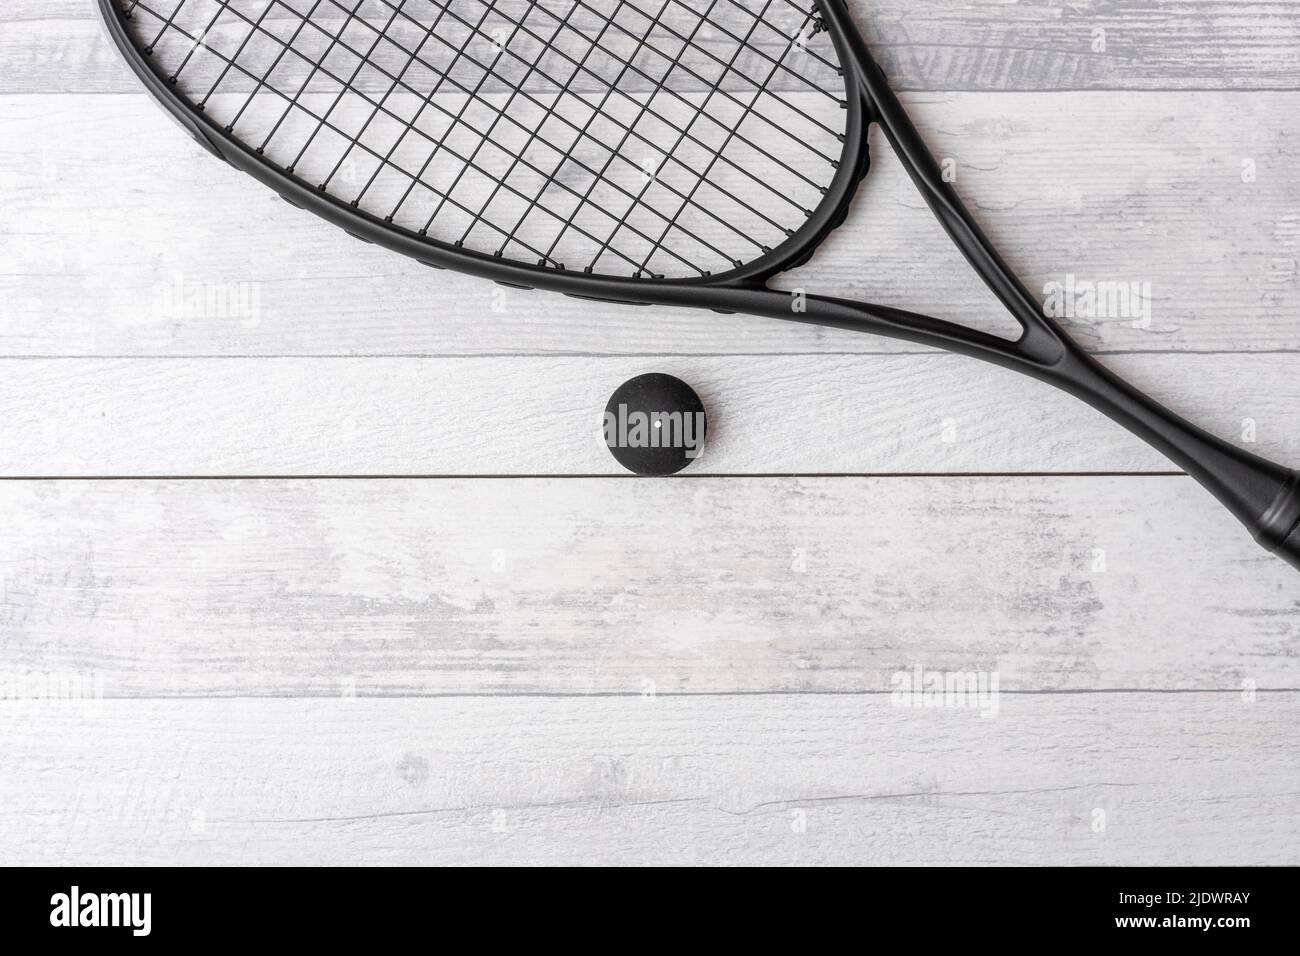 Black squash racket and ball on grey court. Horizontal sport theme poster, greeting cards, headers, website and app Stock Photo